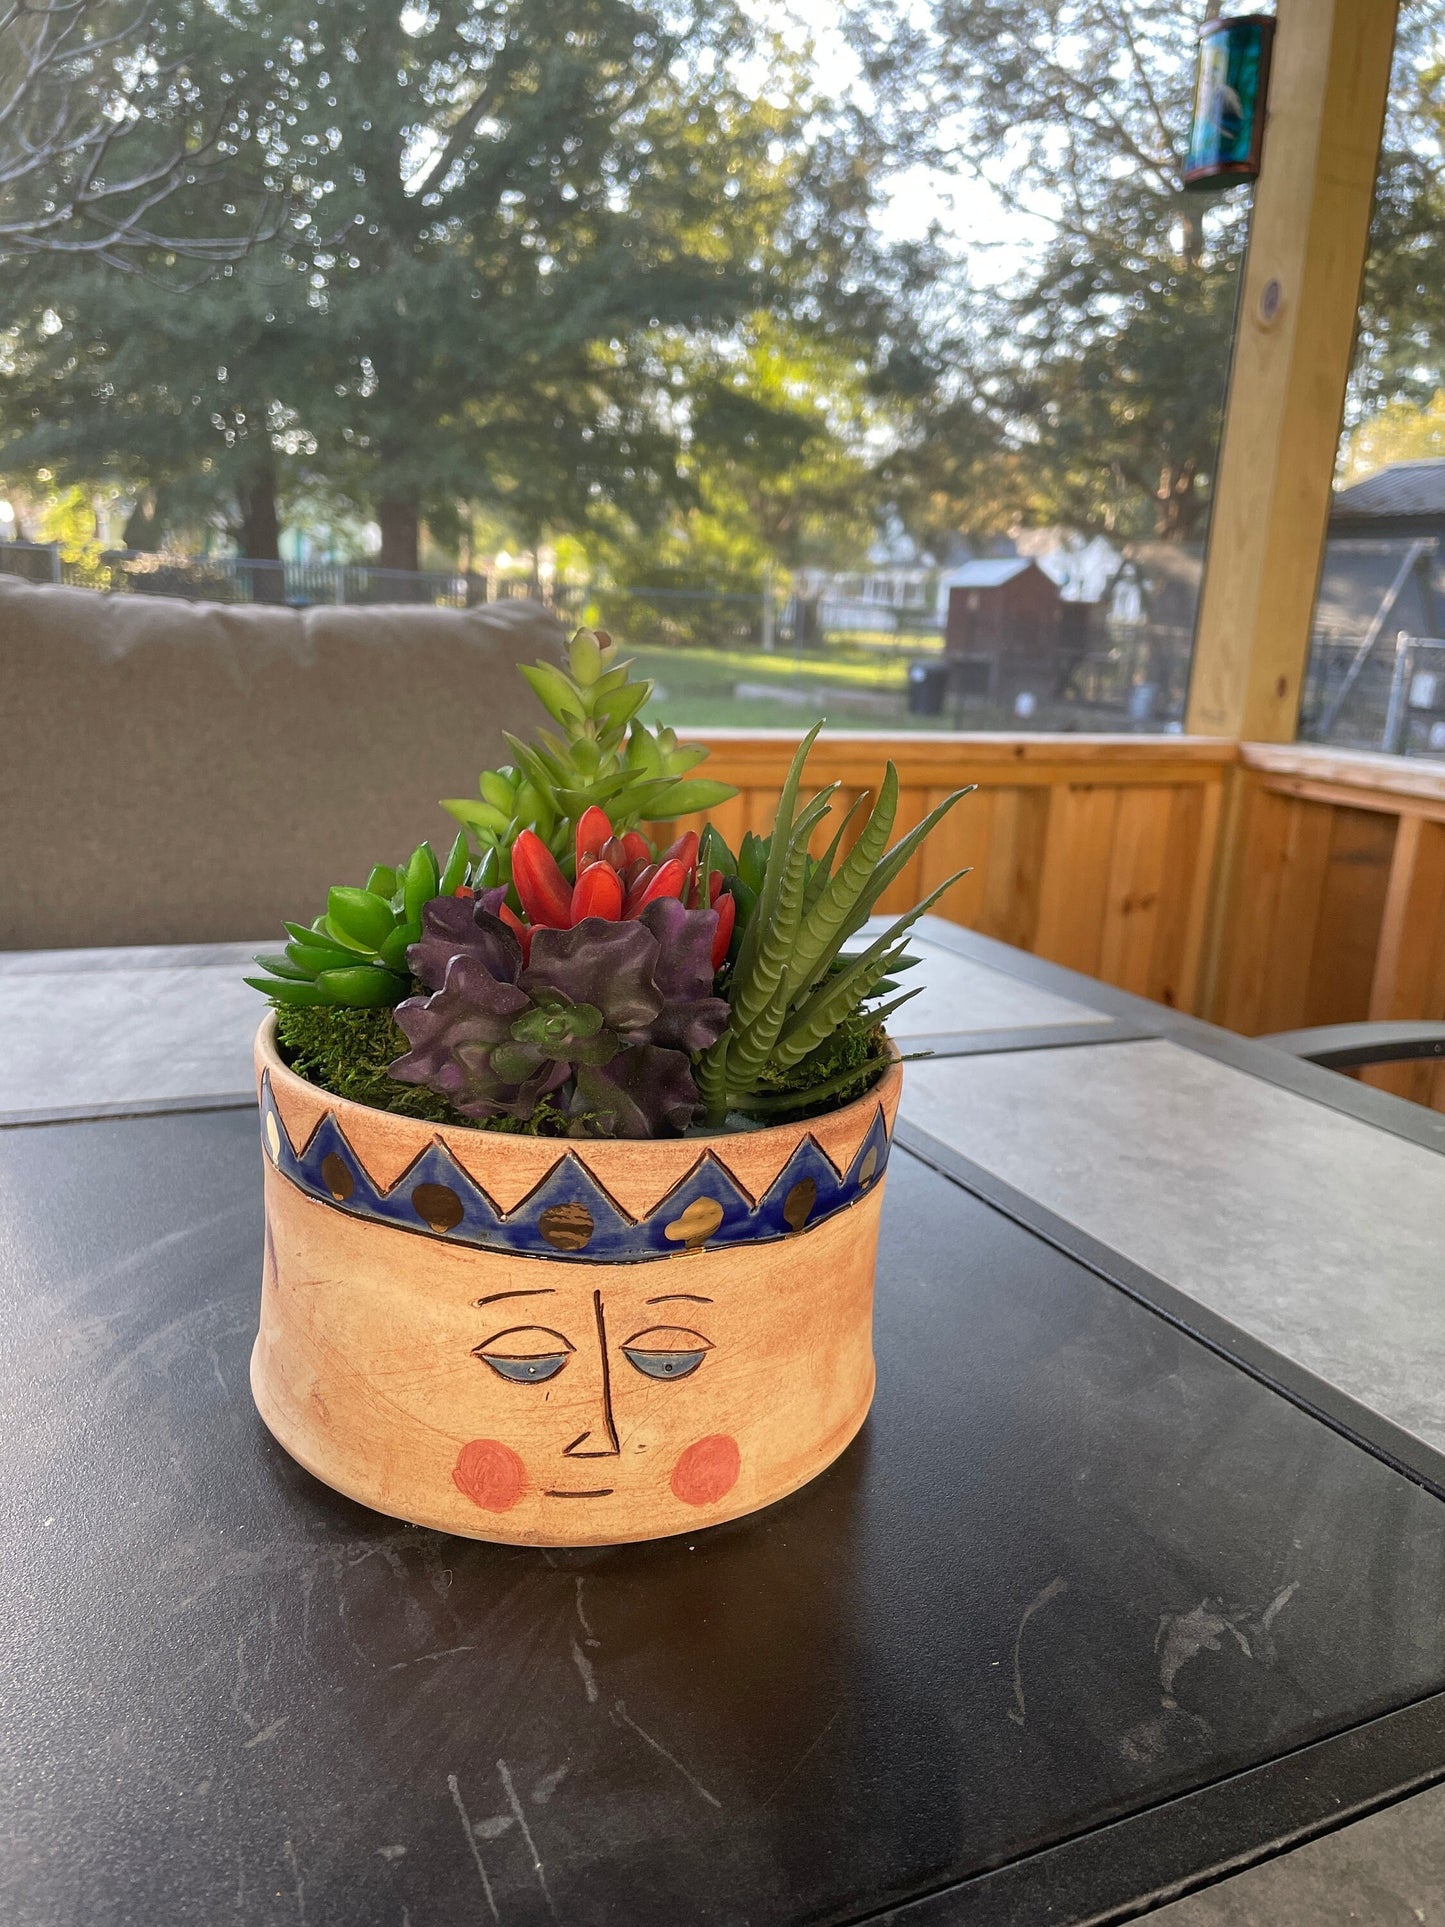 Pottery, Hand-made, Planter, with Face - Pottery Gold Trim, succulents, Gift, Drainage Hole, cute, whimsical, 6" diameter, 3.75 deep